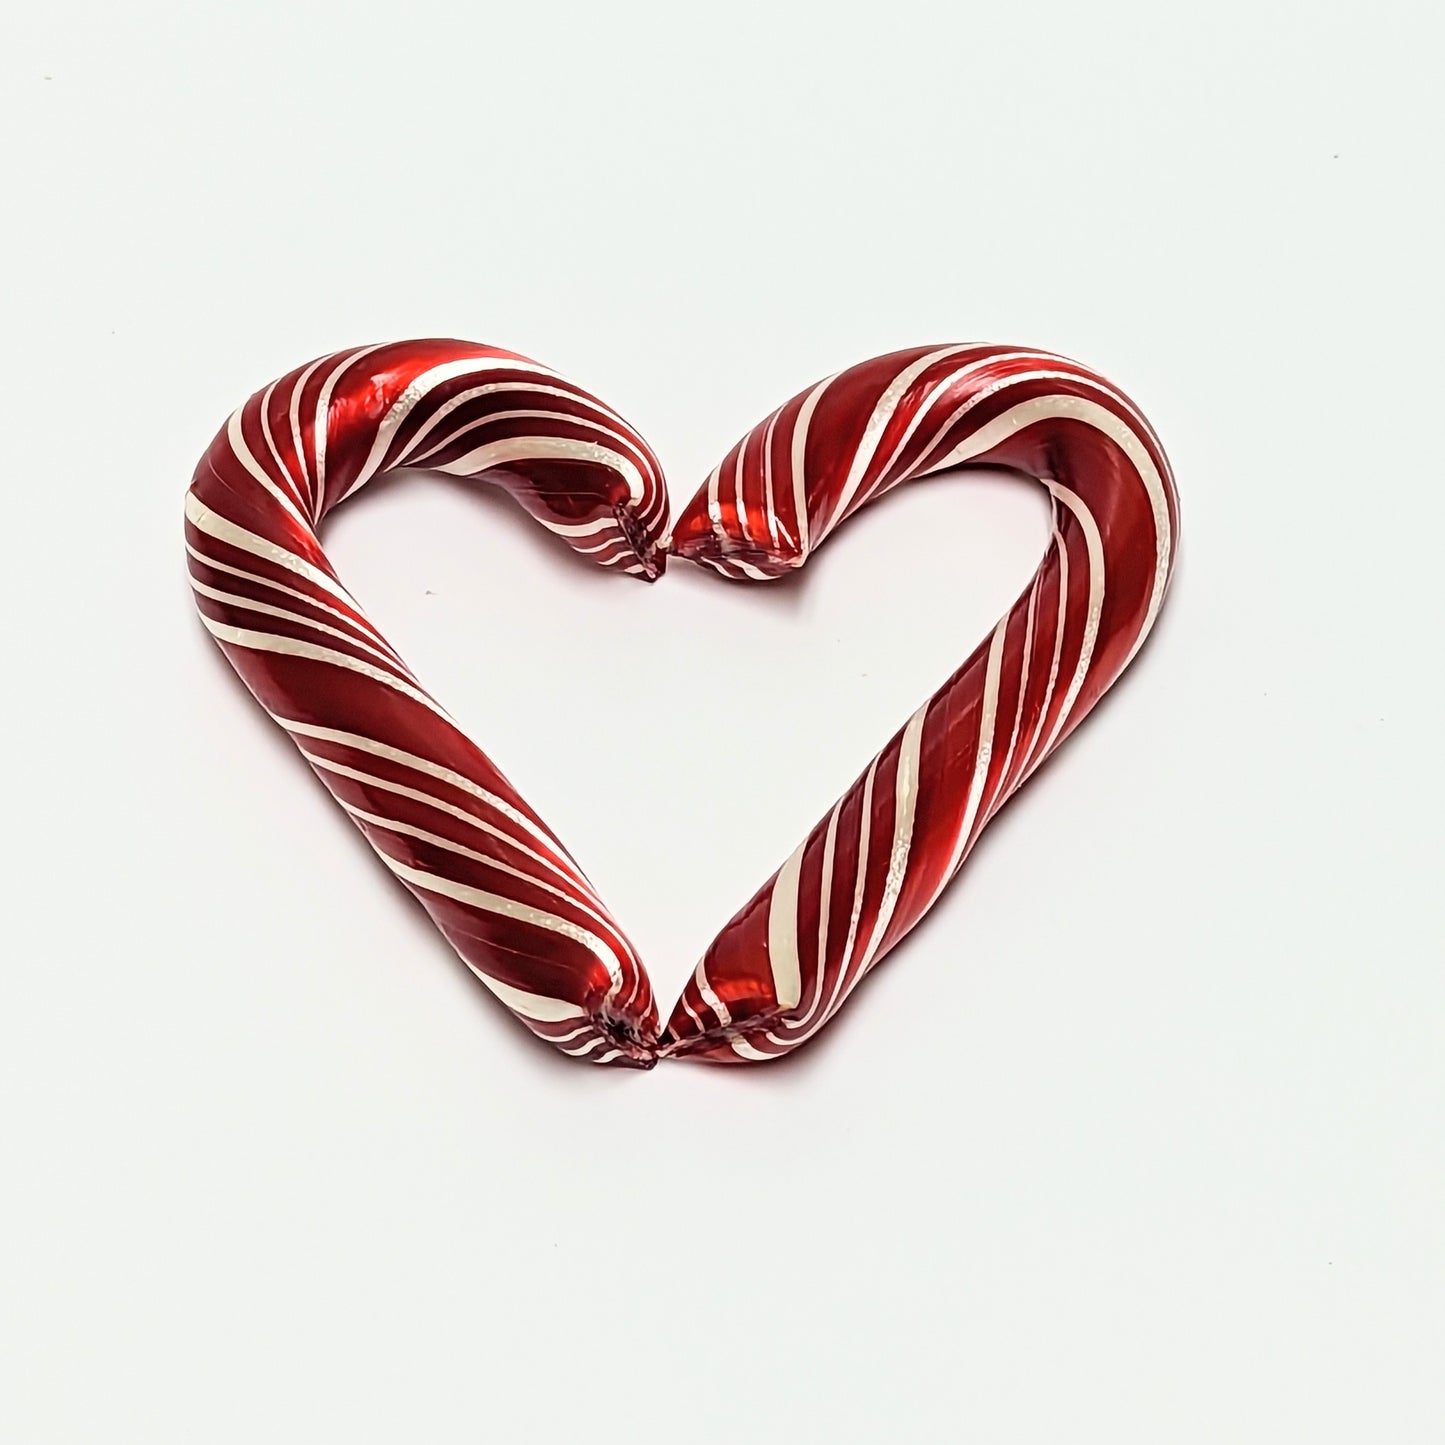 Two Peppermint Candy Canes (2)